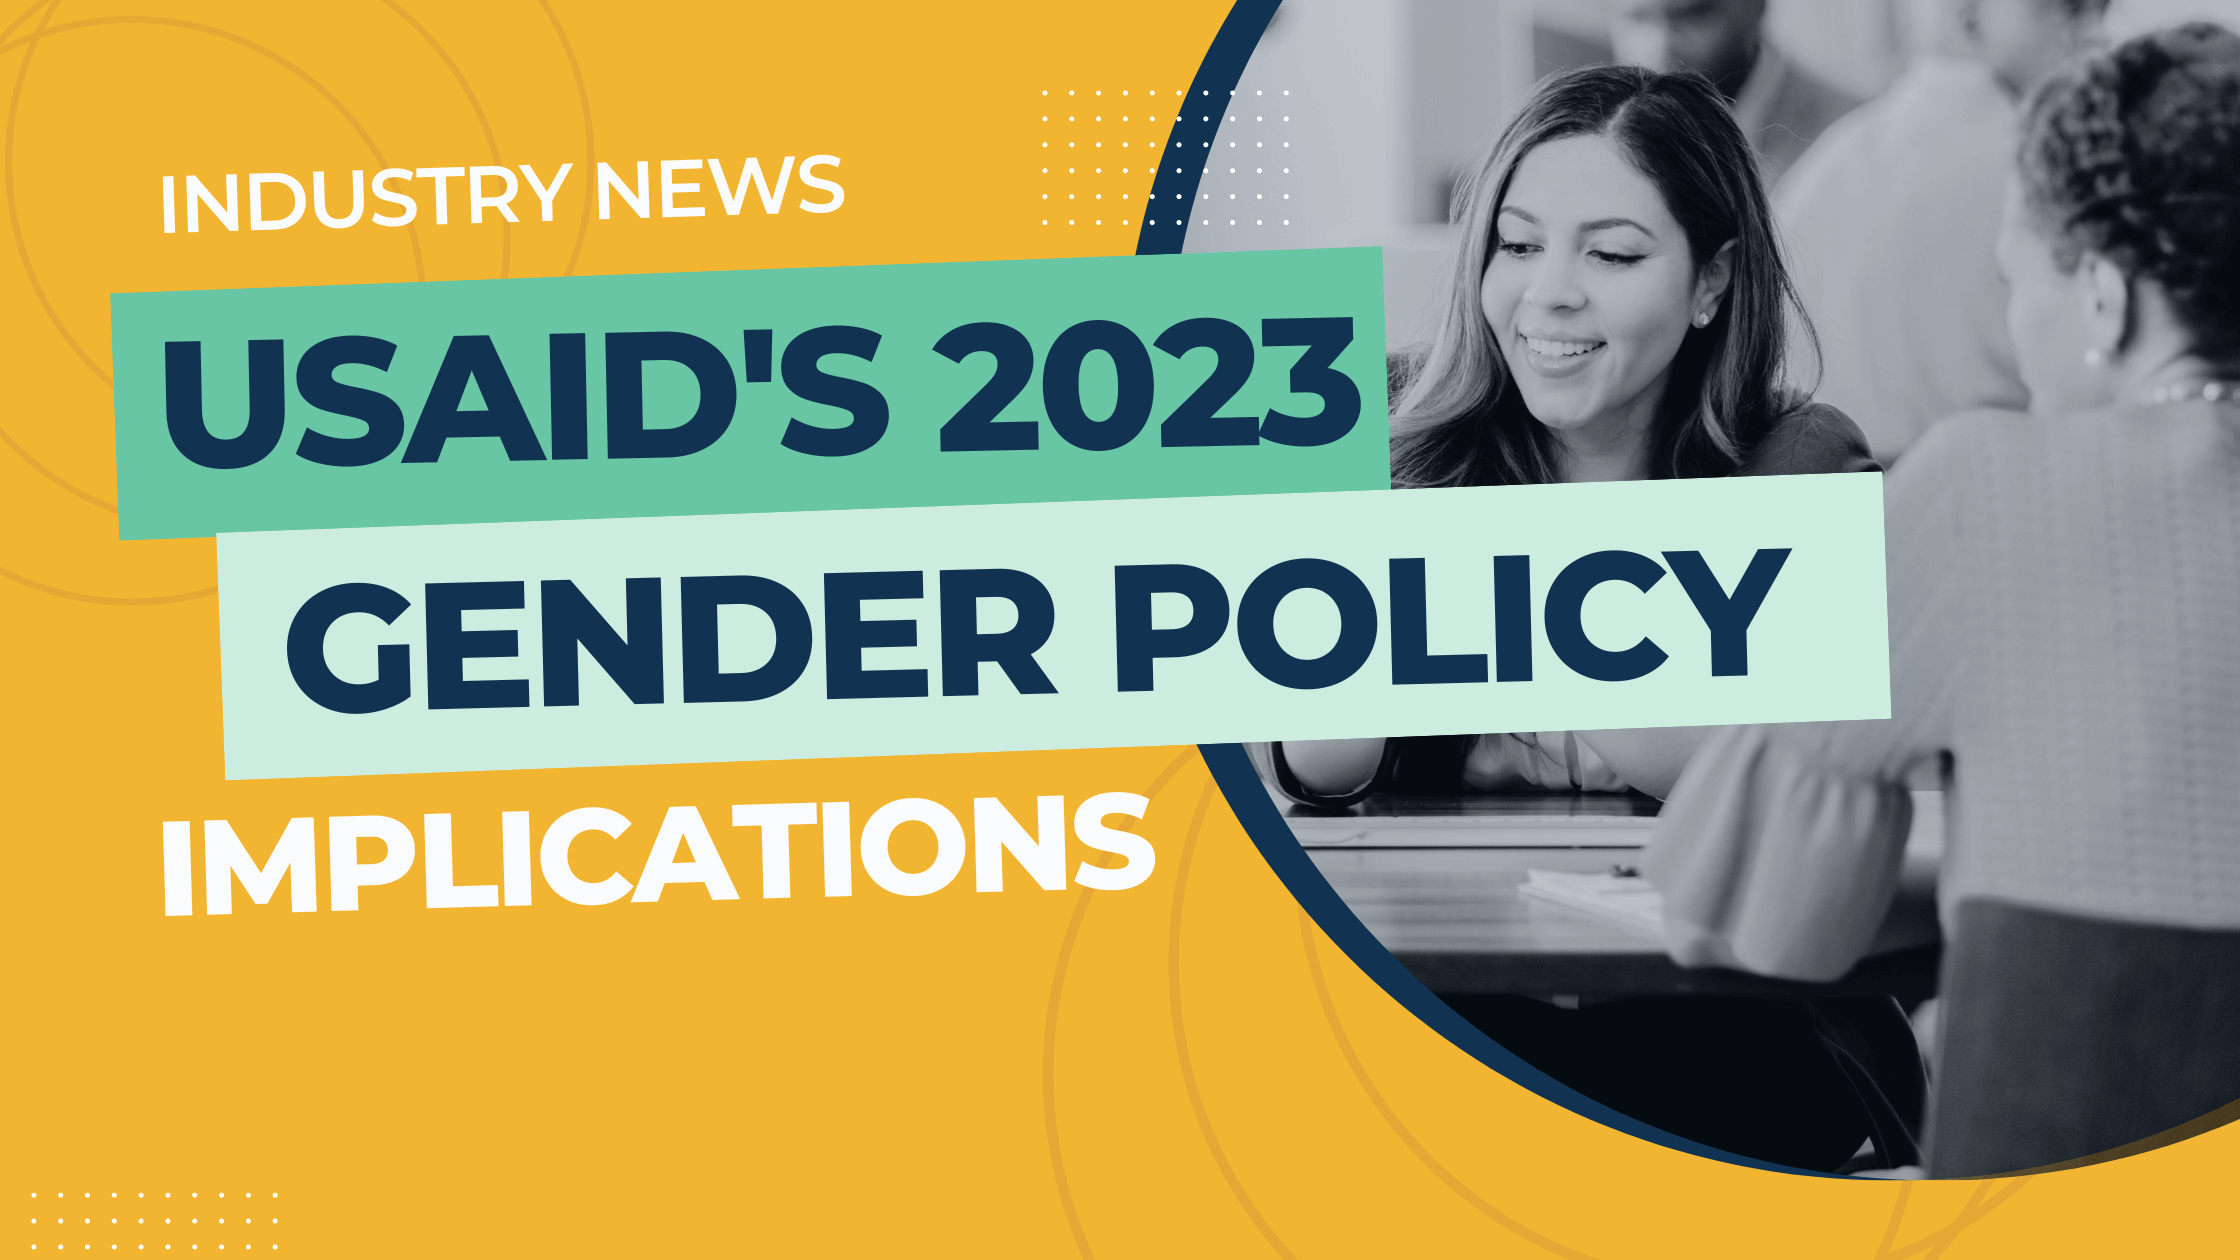 USAIDs 2023 Gender policy implications